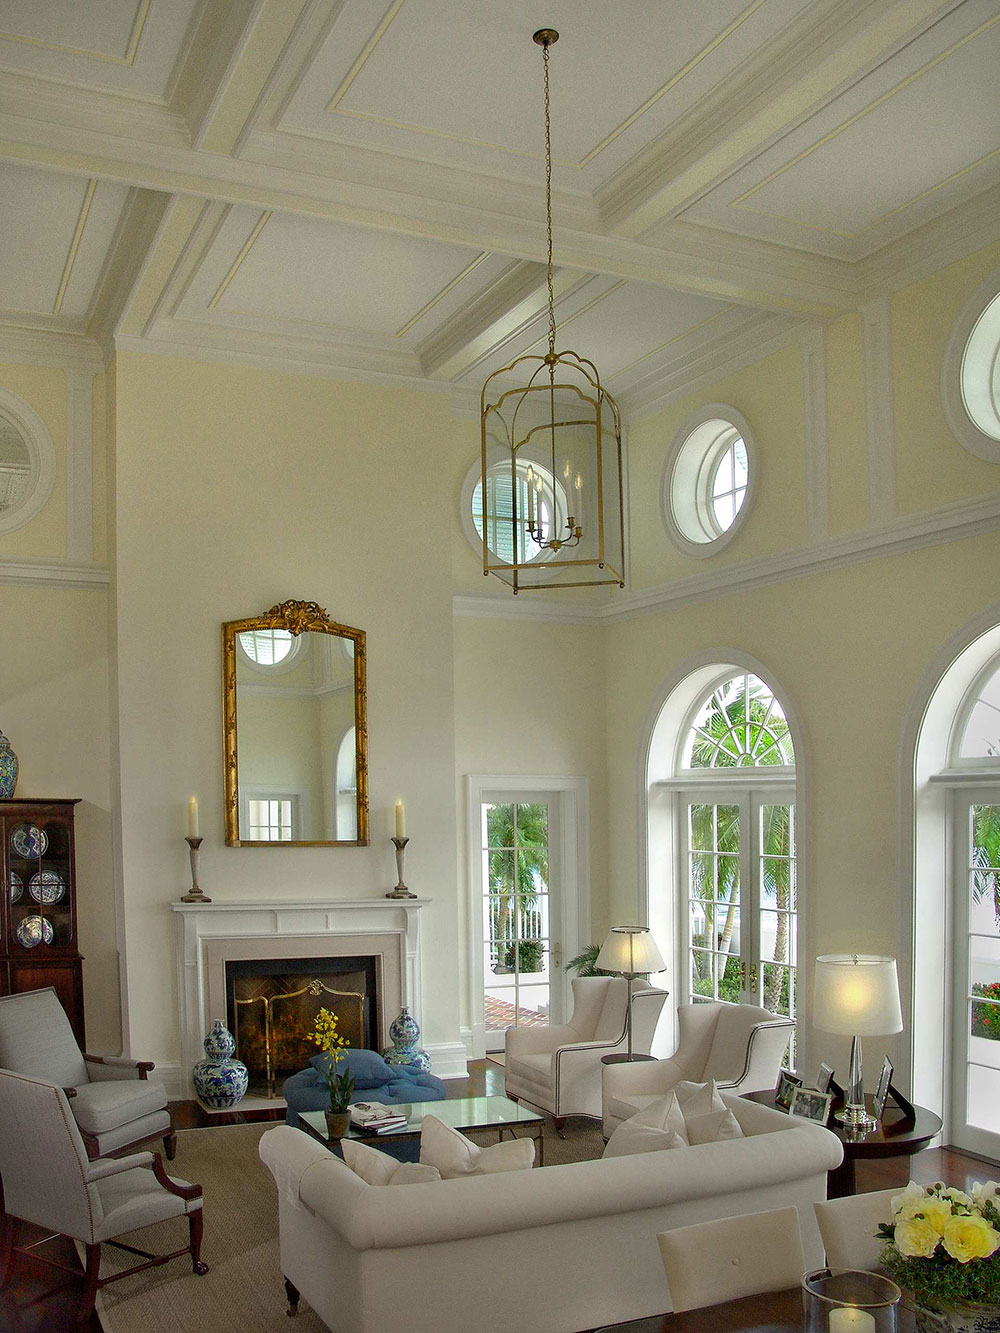 Decorating A Room With High Ceiling5